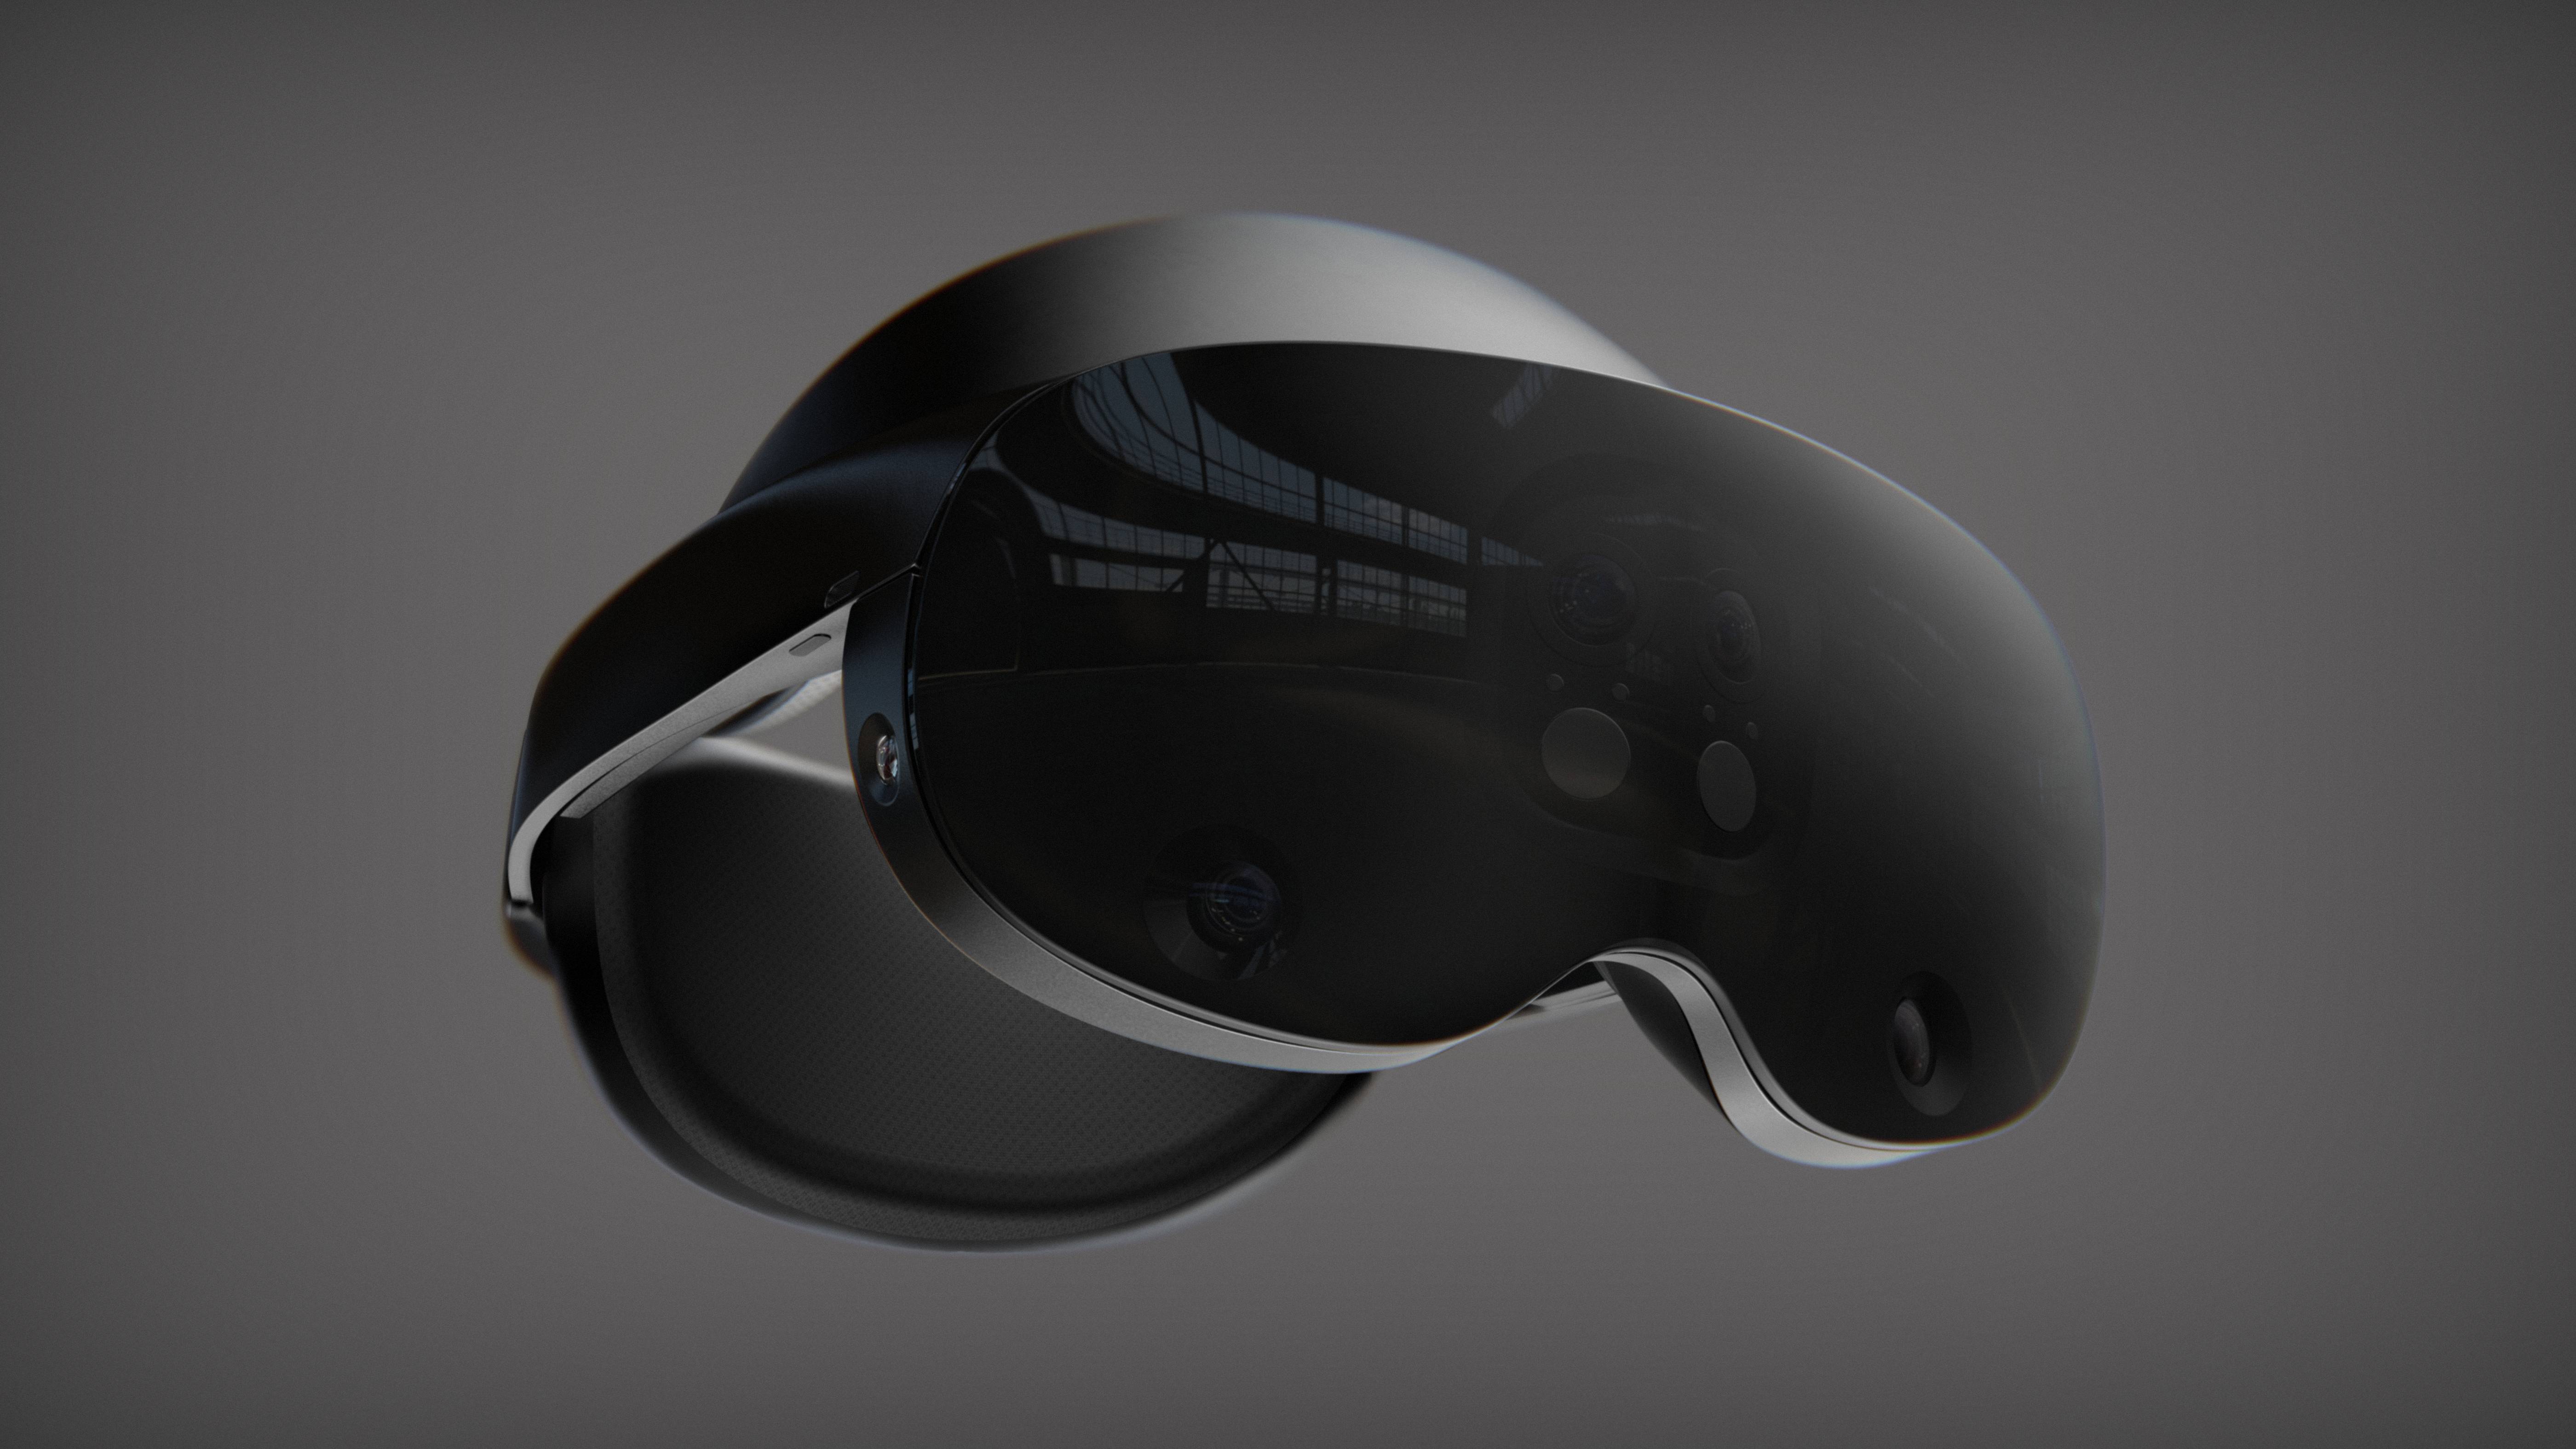 Meta Cambria: This is what the finished VR headset could look like